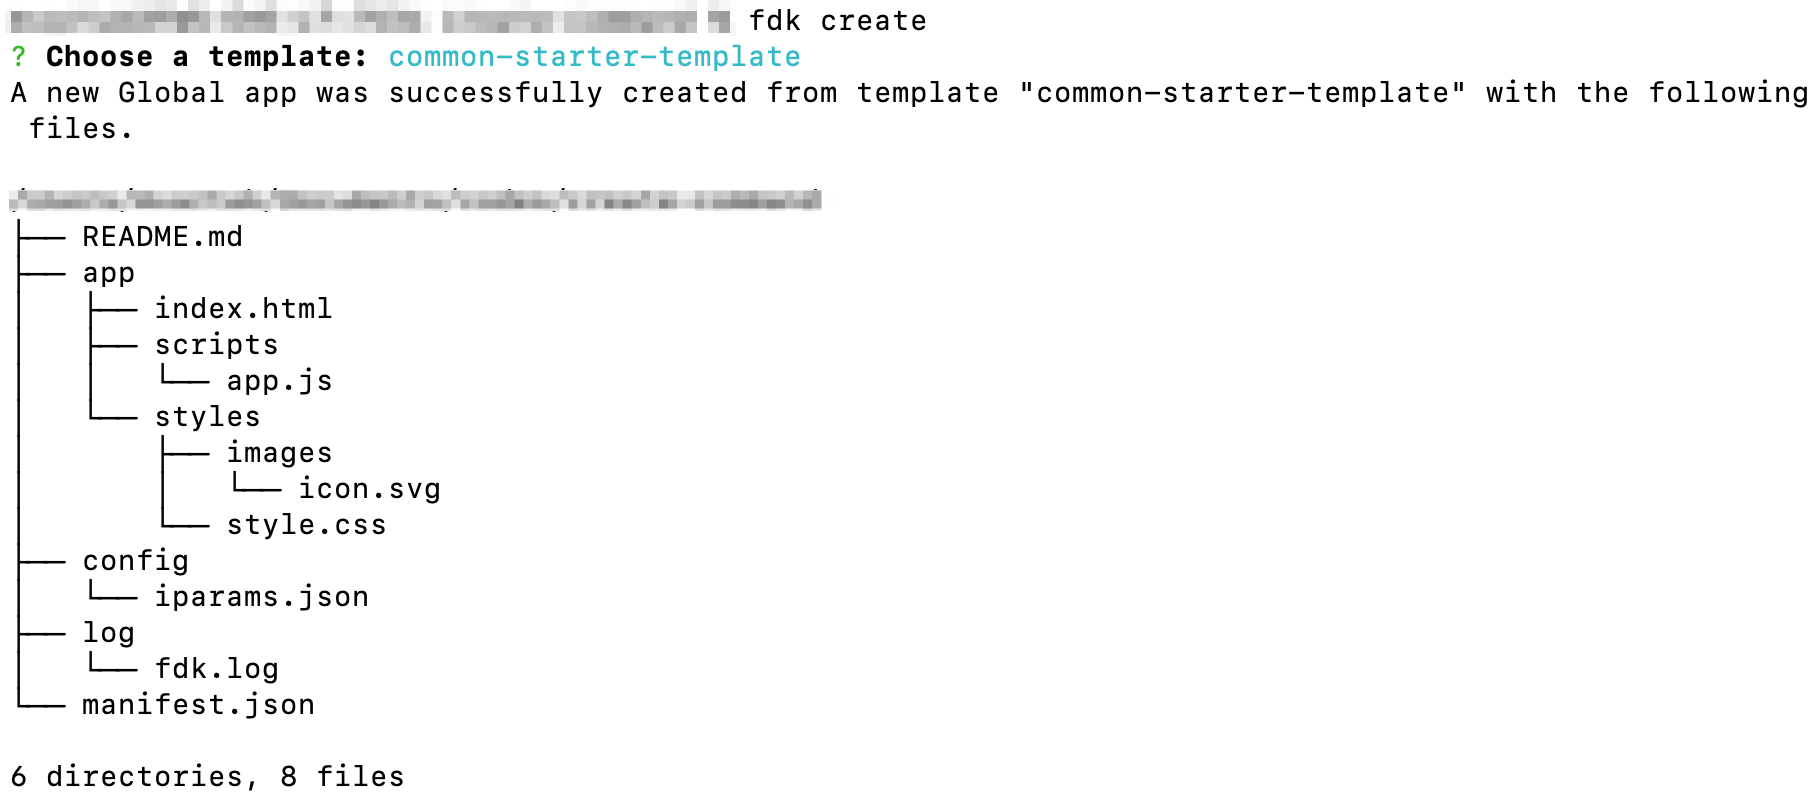 Directories and files that the create command generates